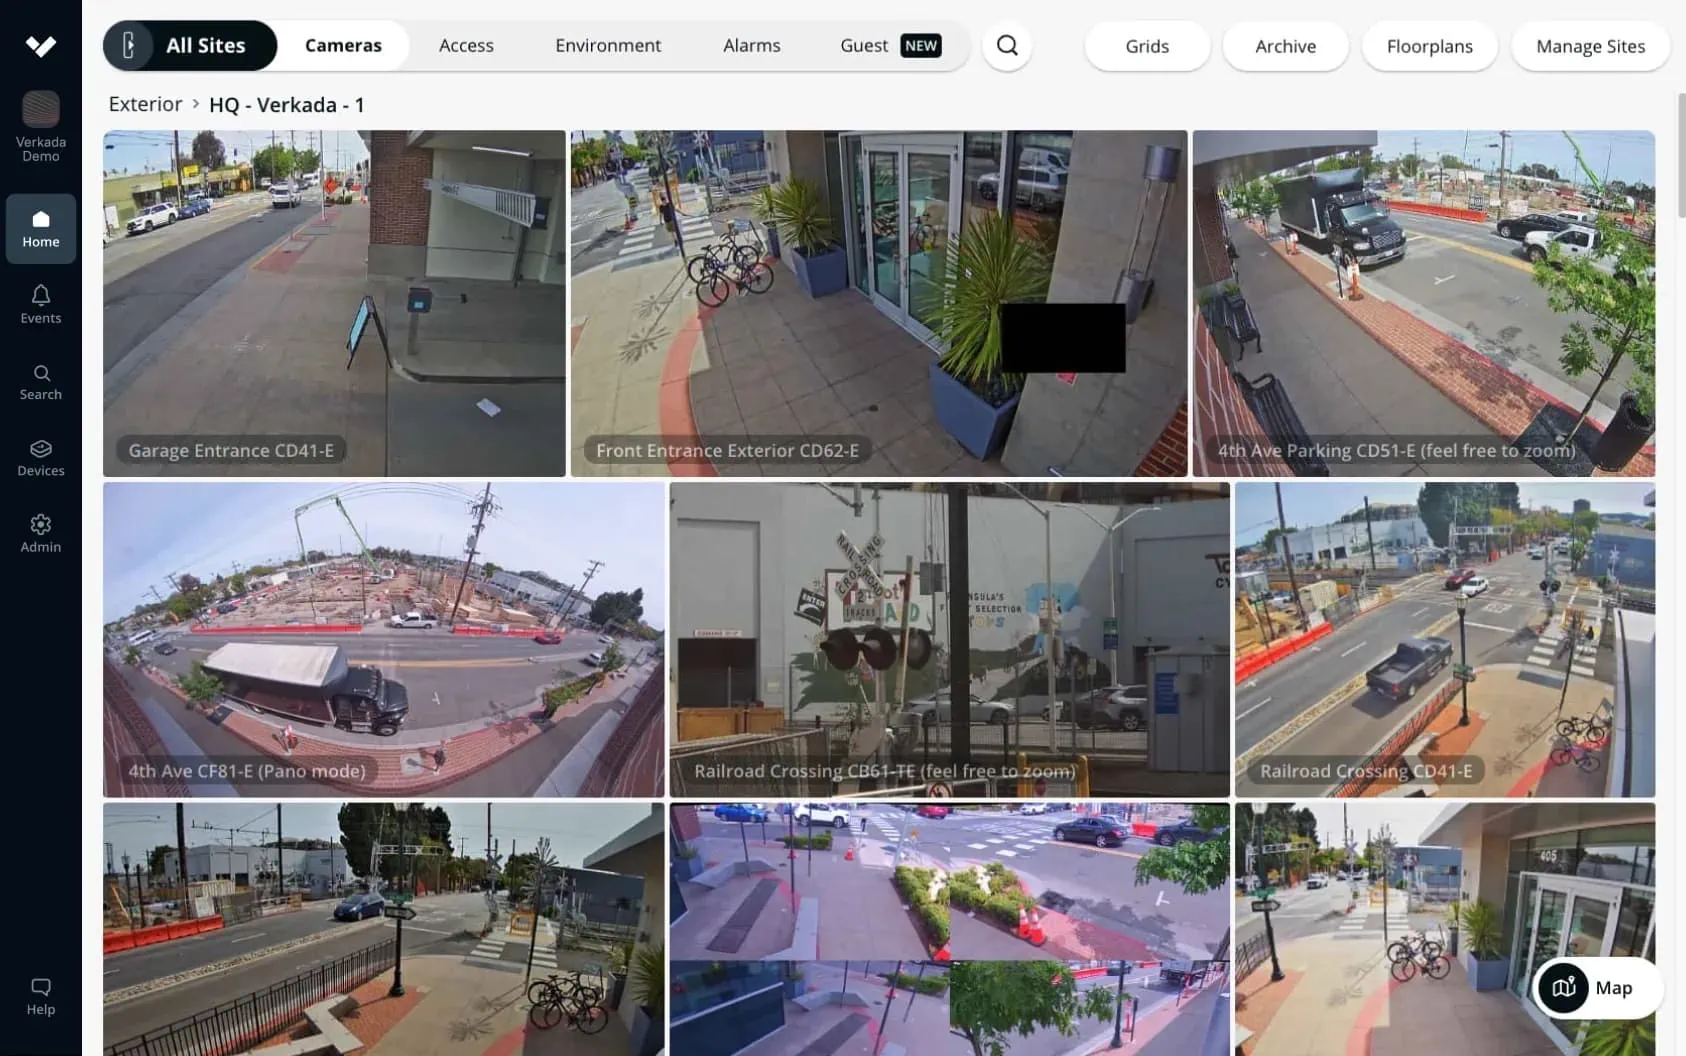 Remote monitoring from security cameras of a business in Rockford, IL